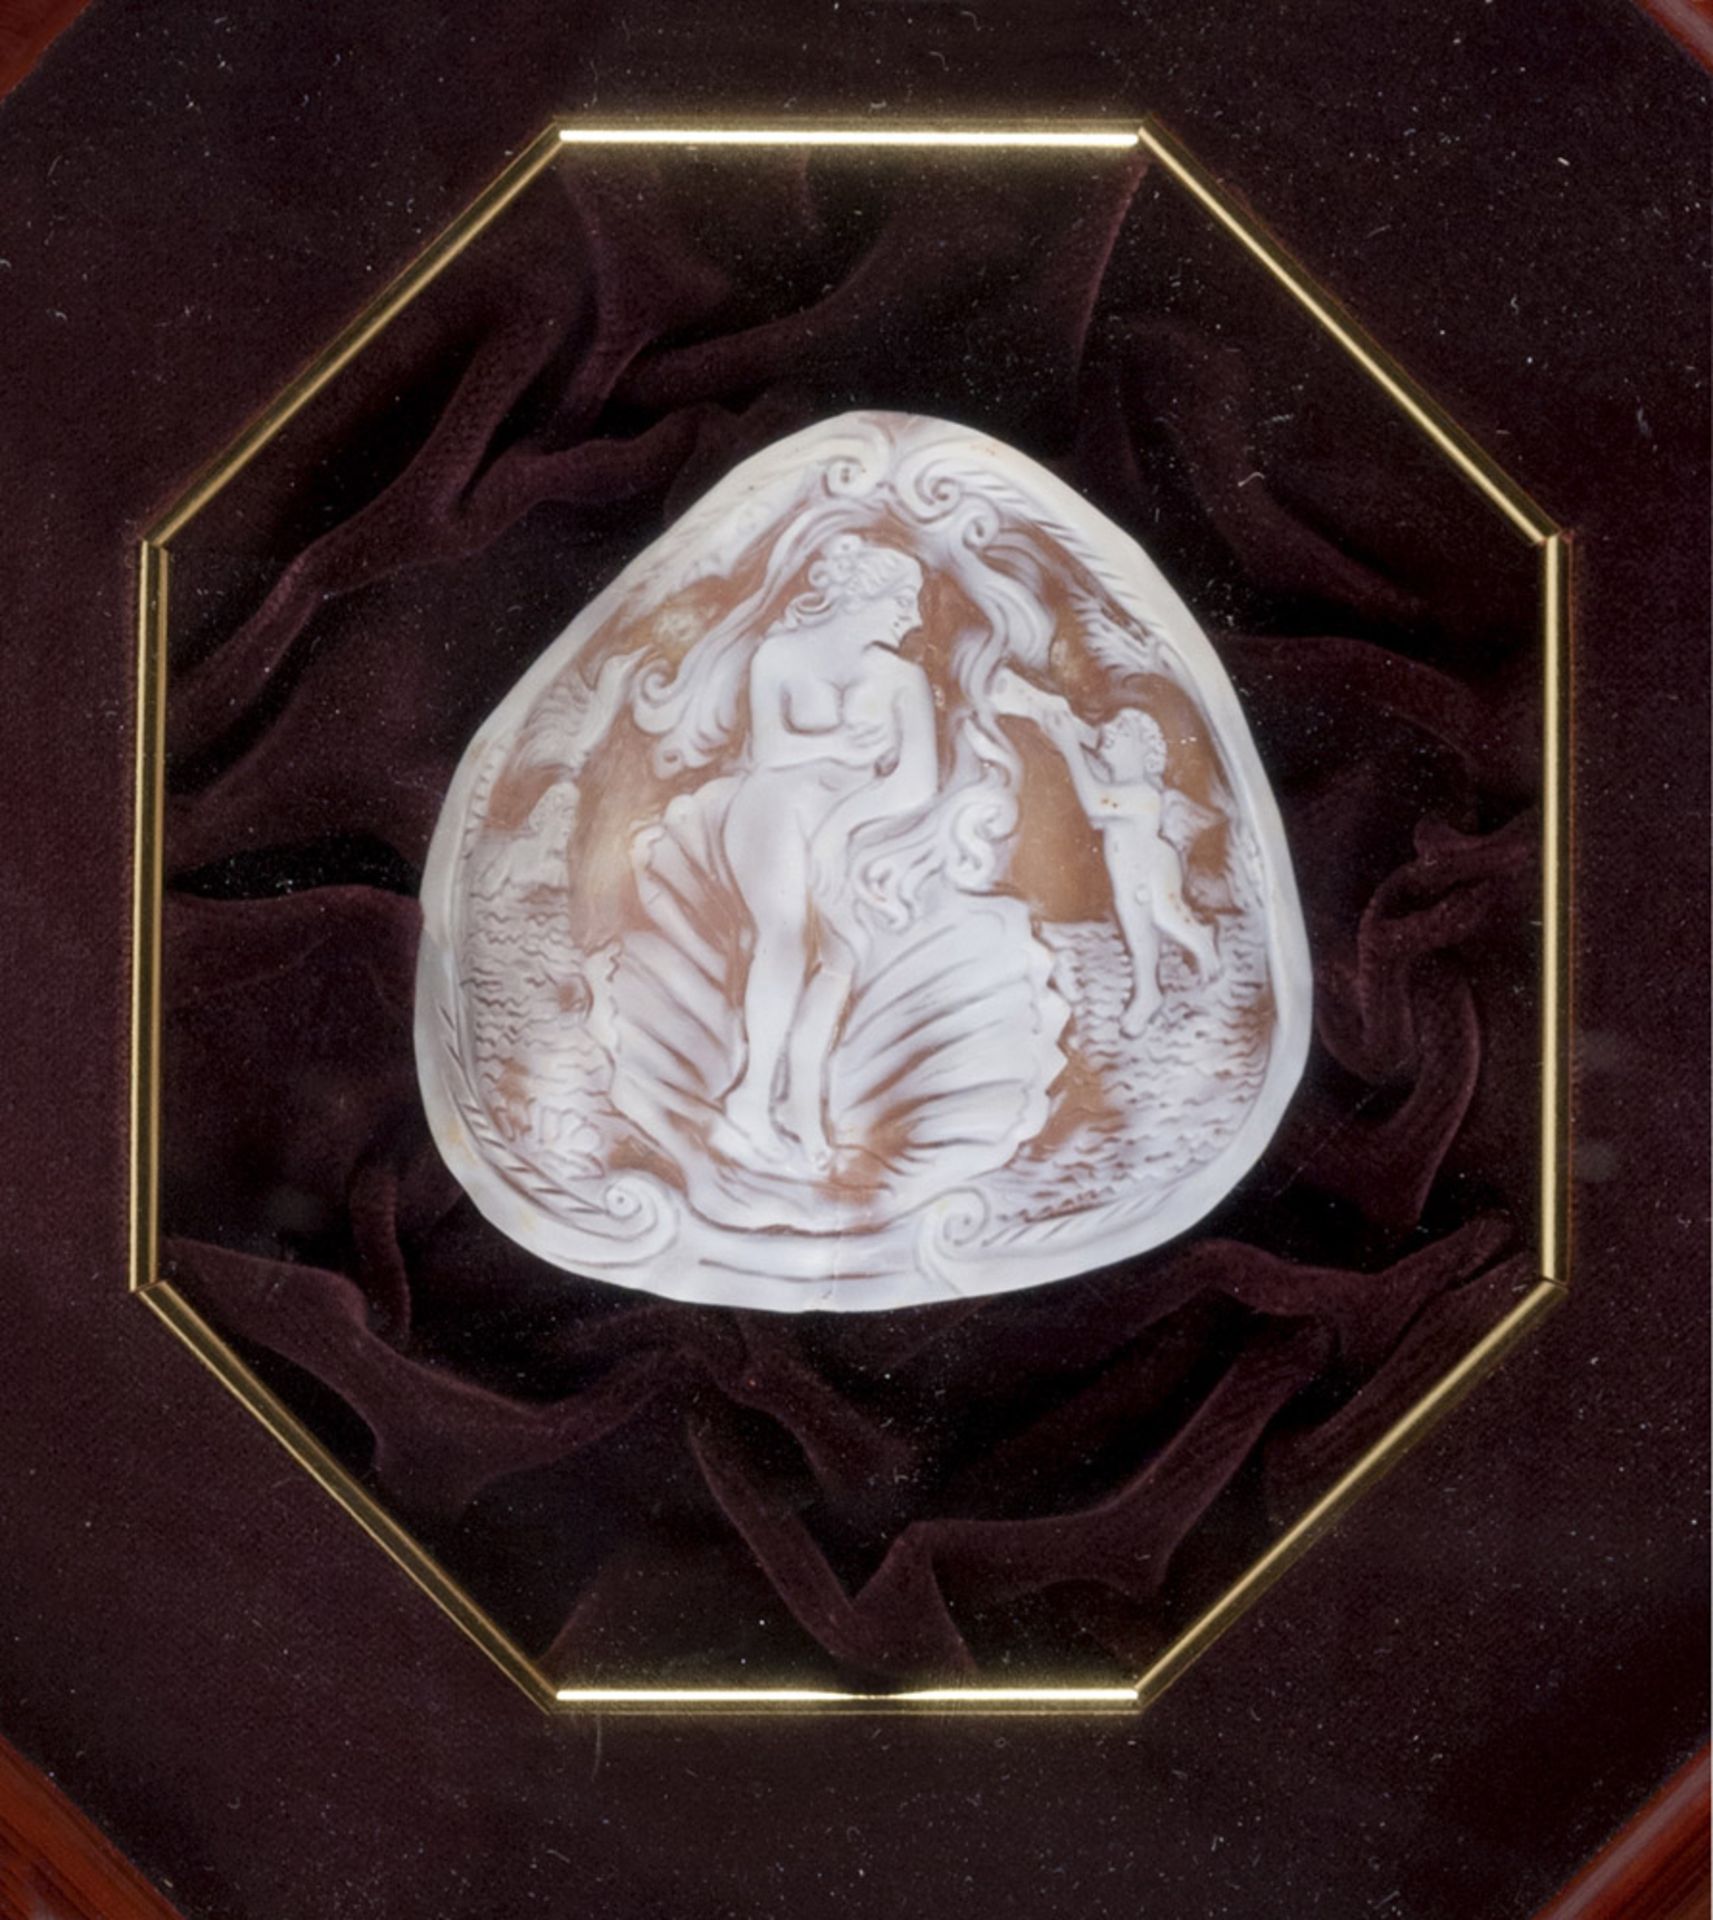 TWO DECORATED CAMEOS, EARLY 20TH CENTURY representing 'Two women' and 'Birth of Venus.' Measures cm.